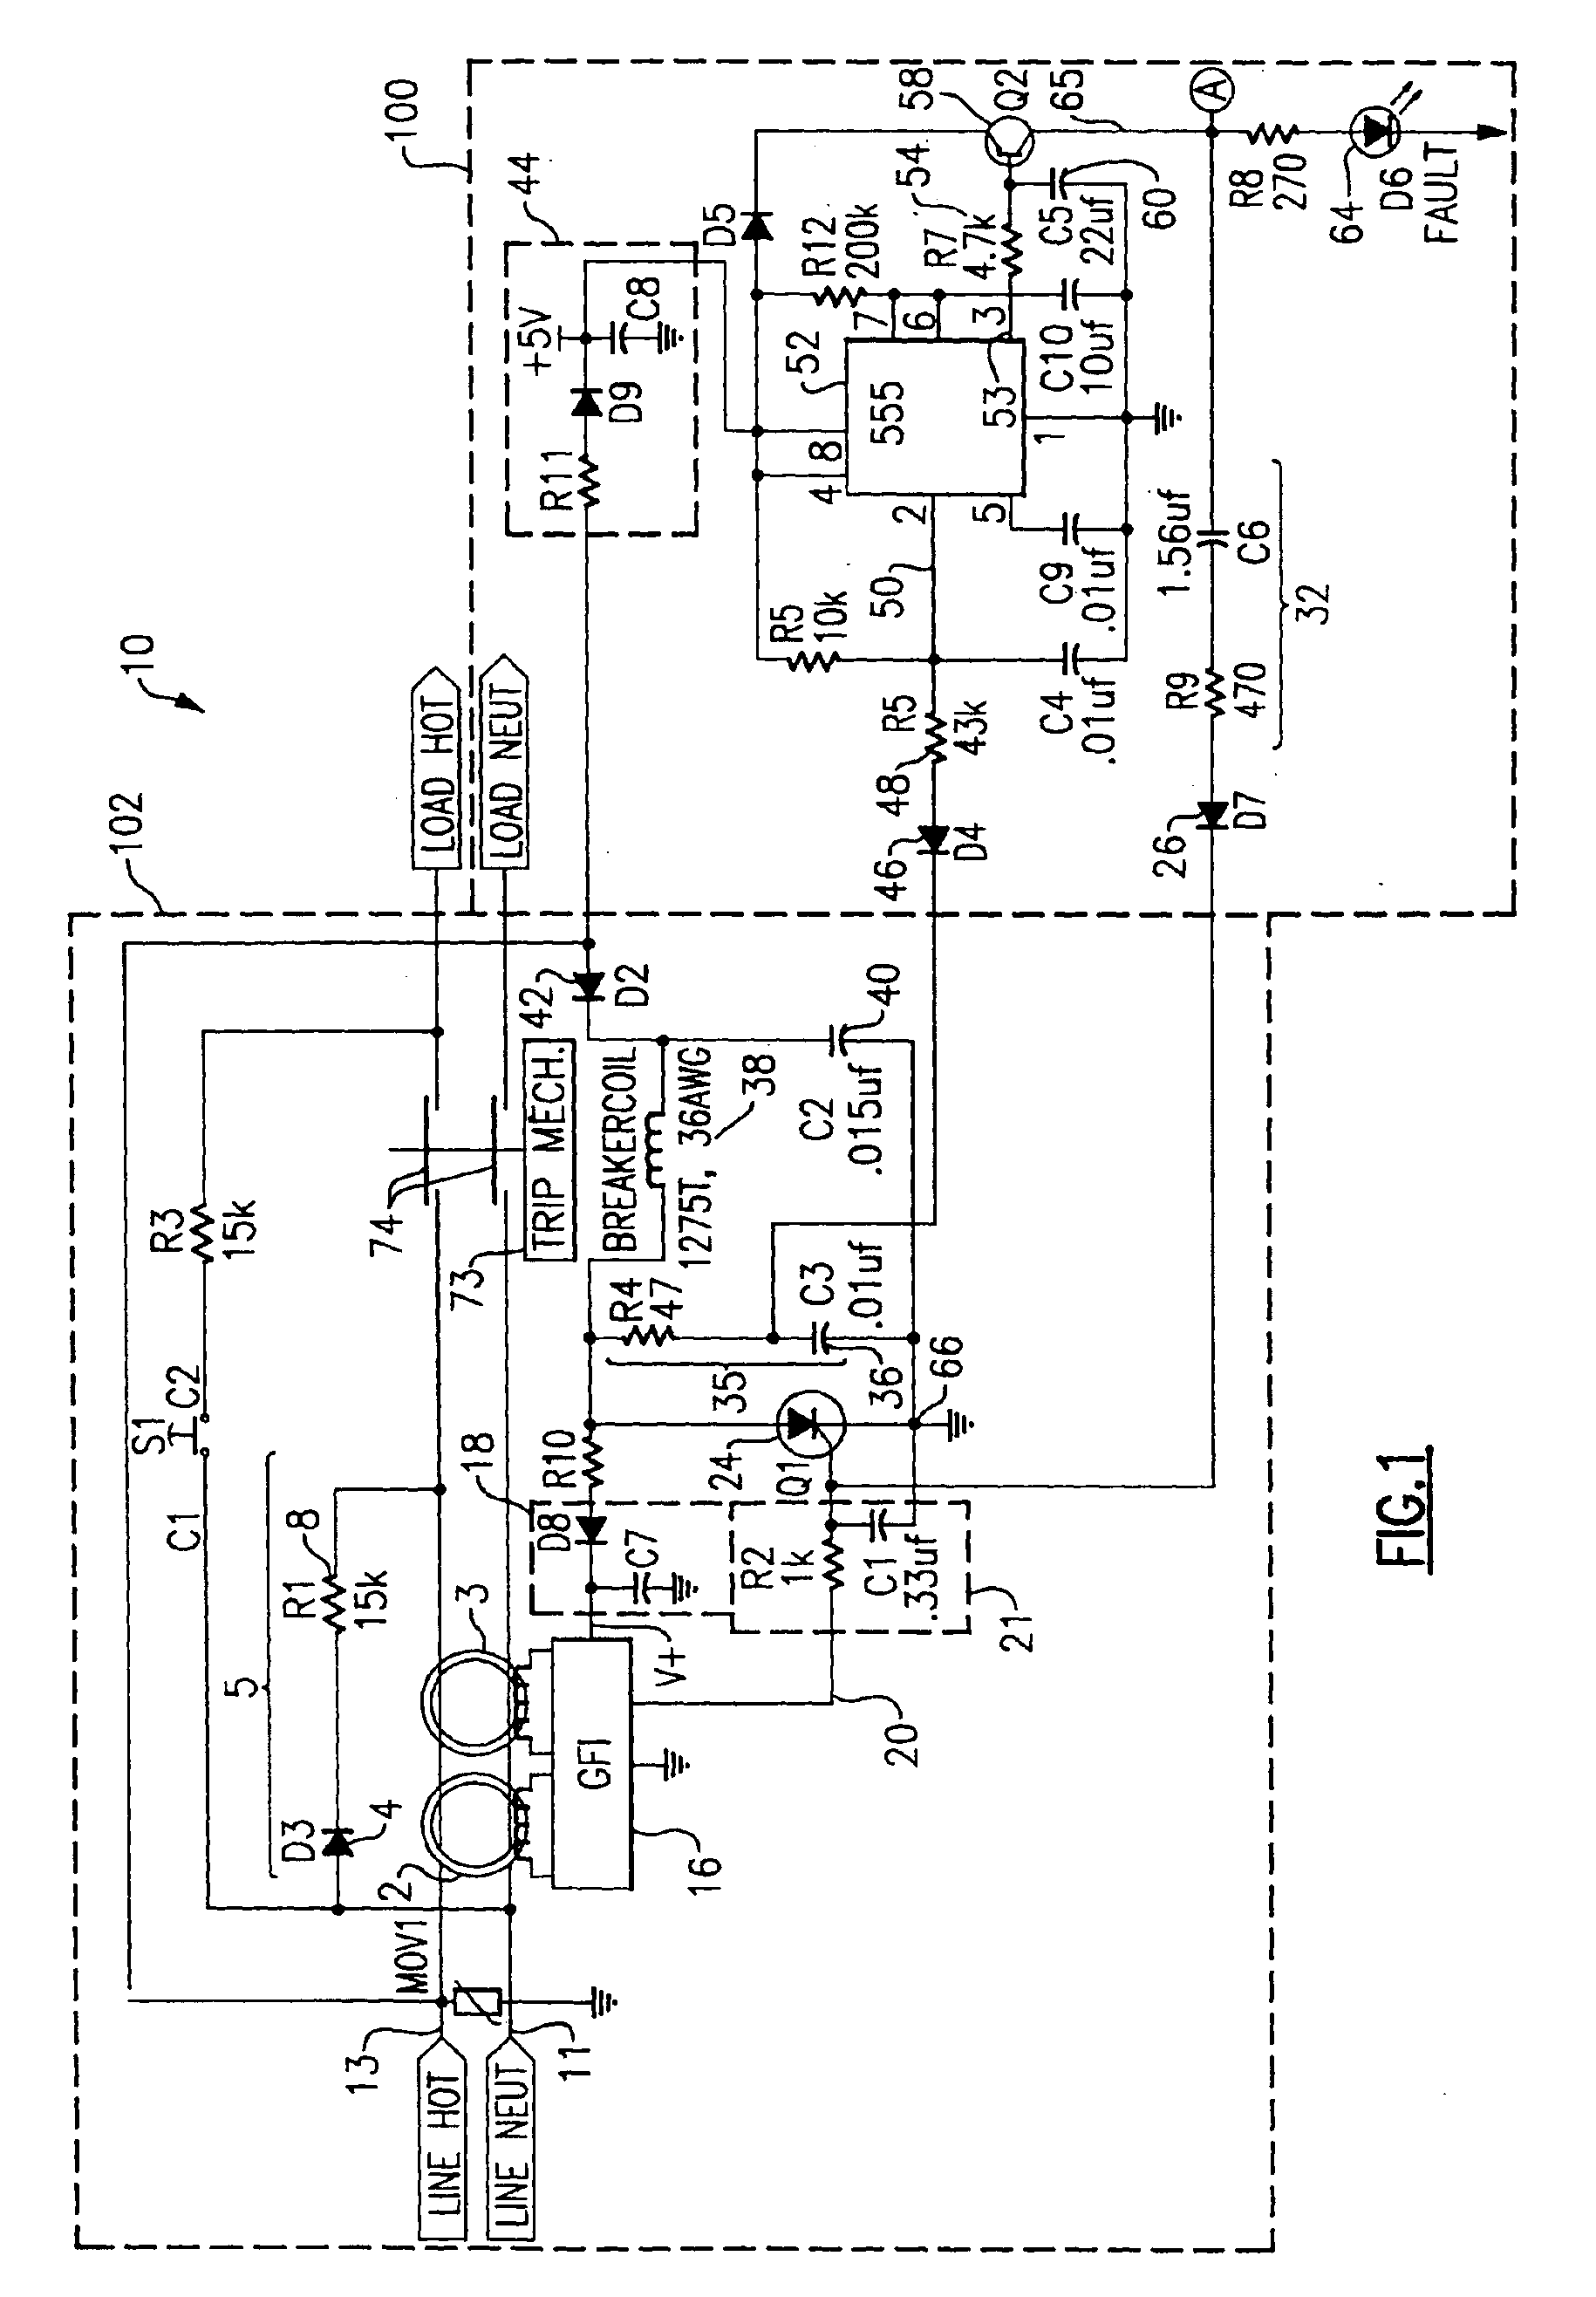 Circuit protection device with half cycle self test